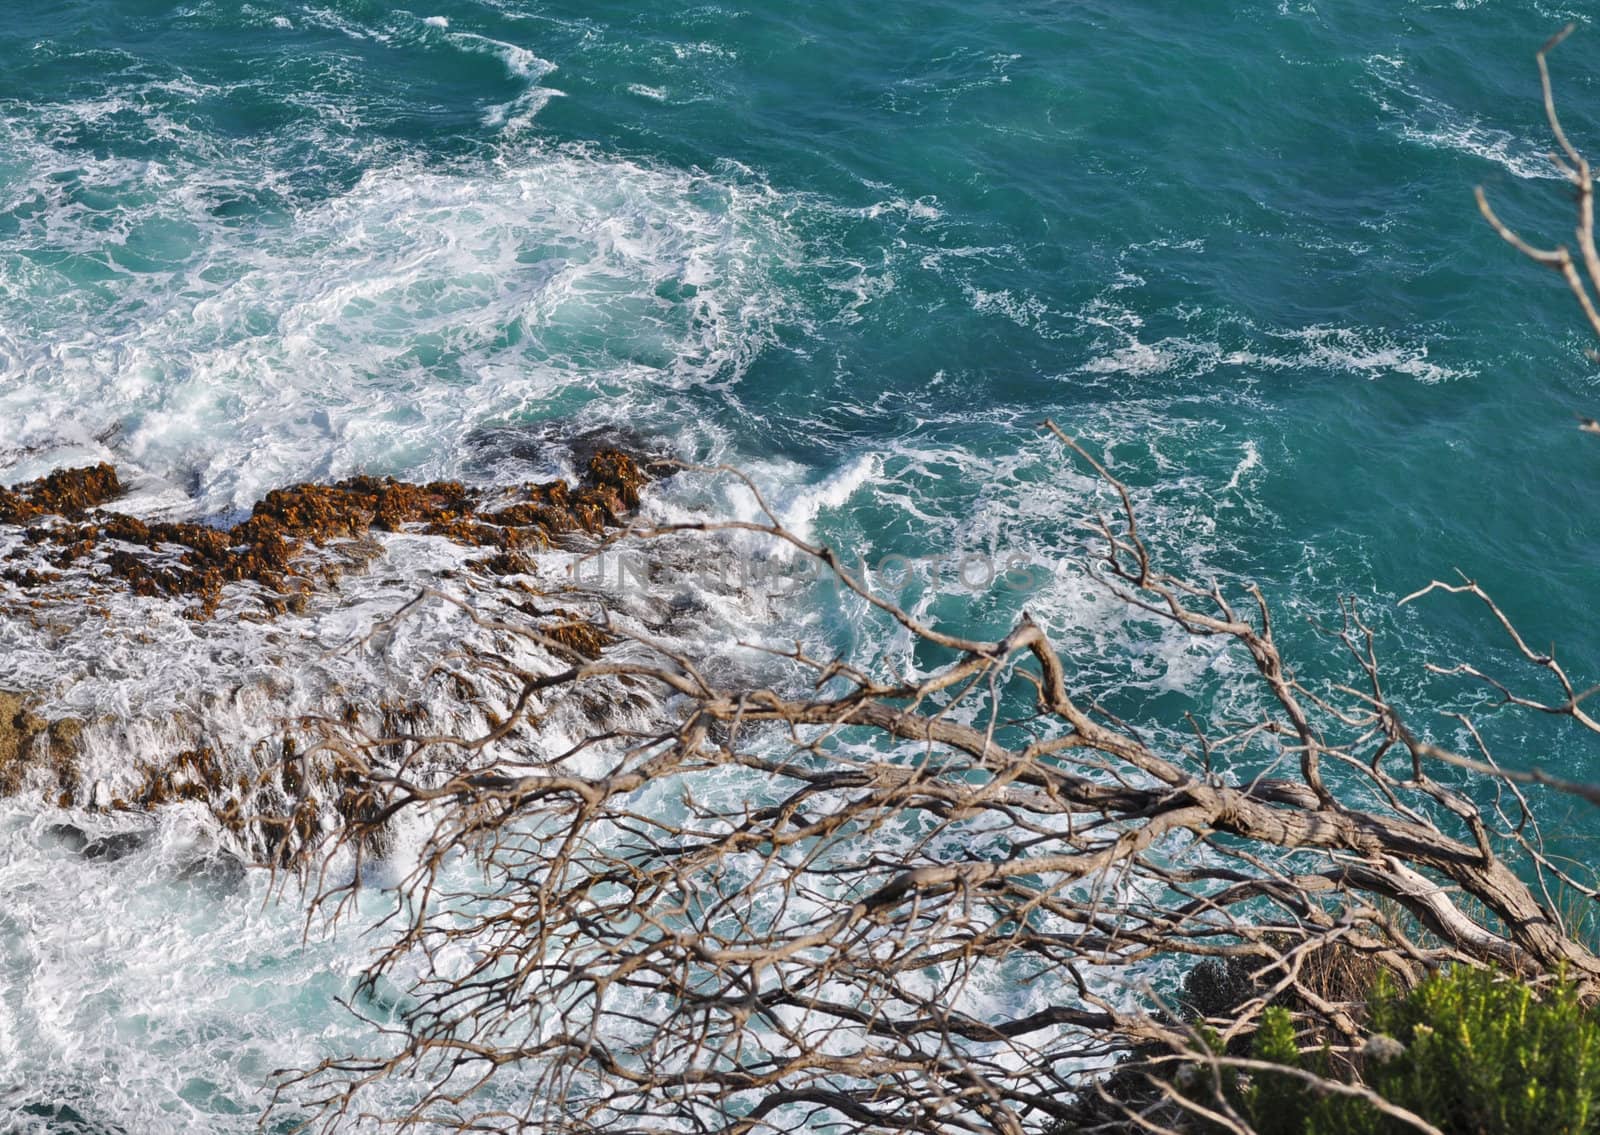 Old tree branch with Big ocean waves background by dimkadimon